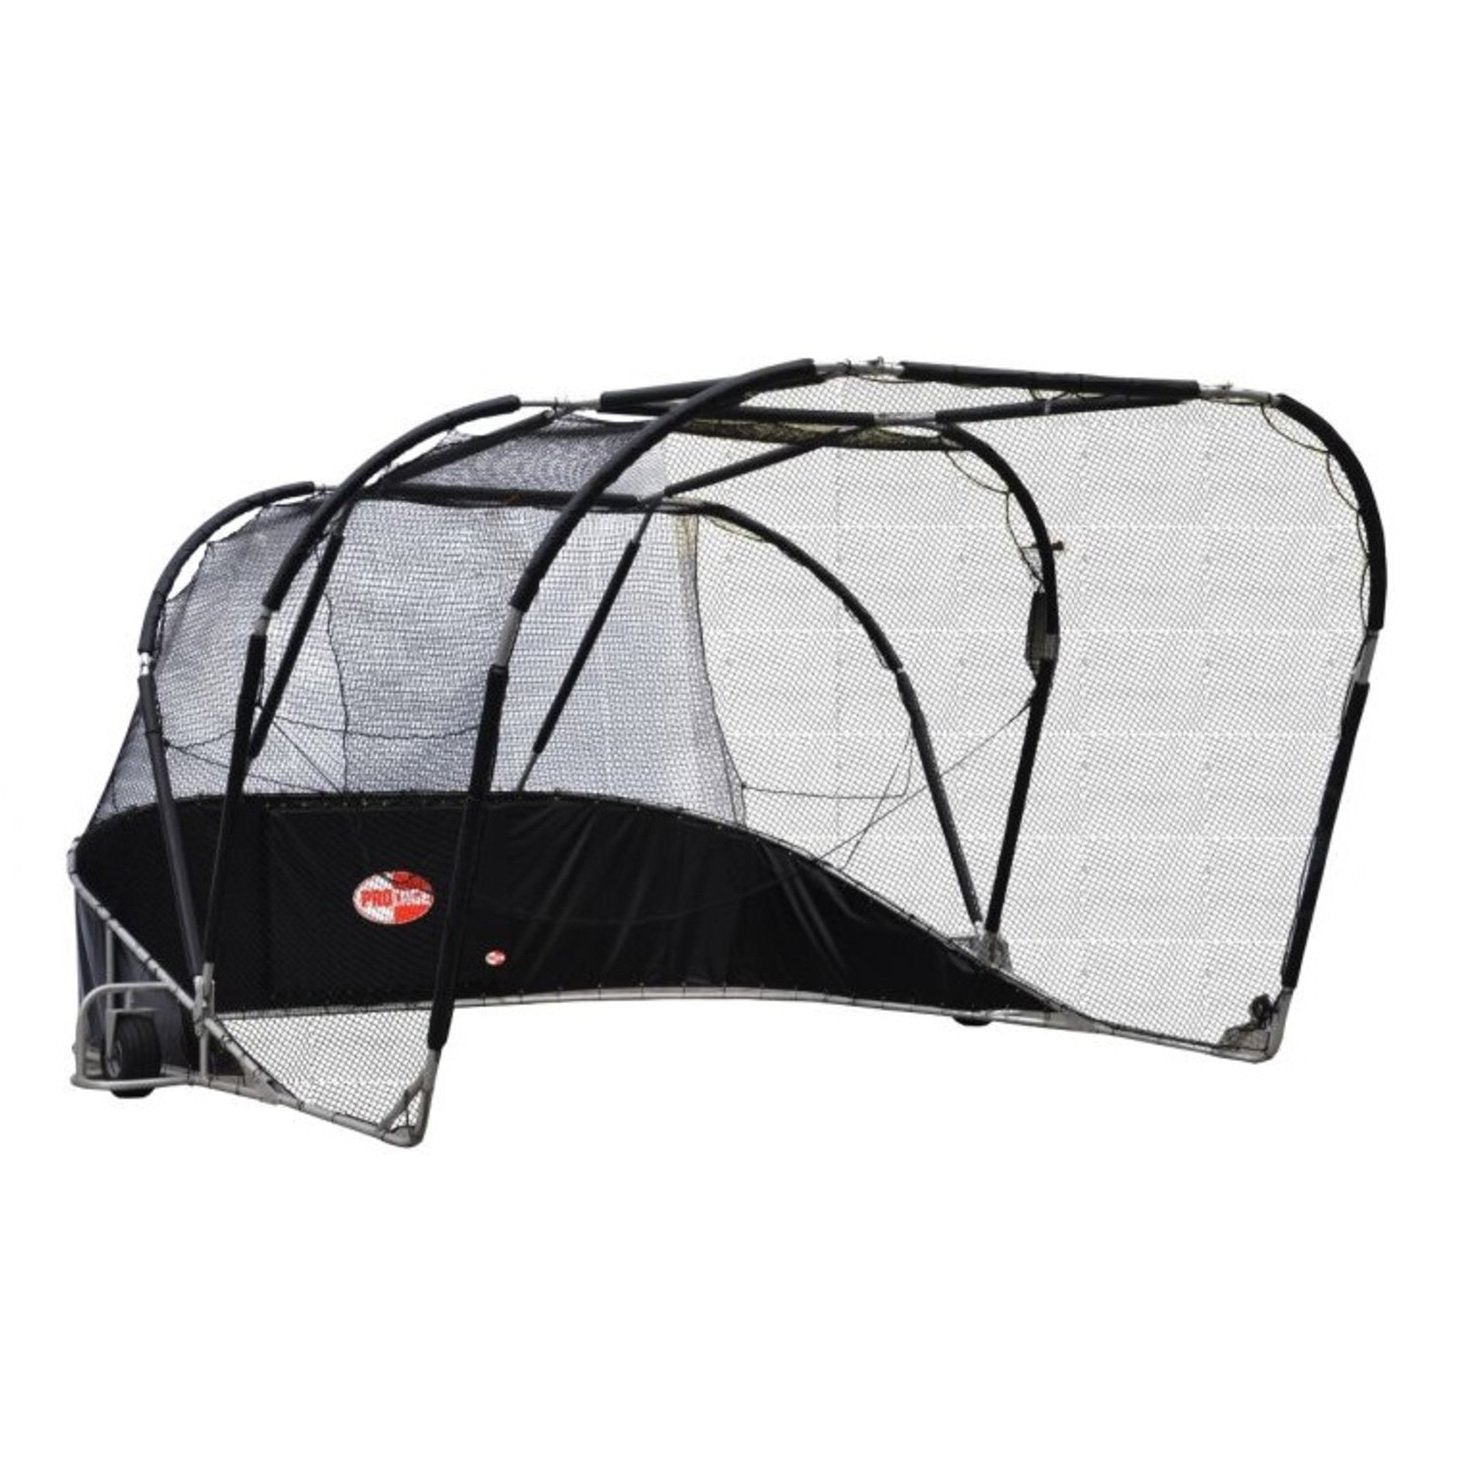 Procage Professional Roll Away Portable Hitting Turtle Batting Cage